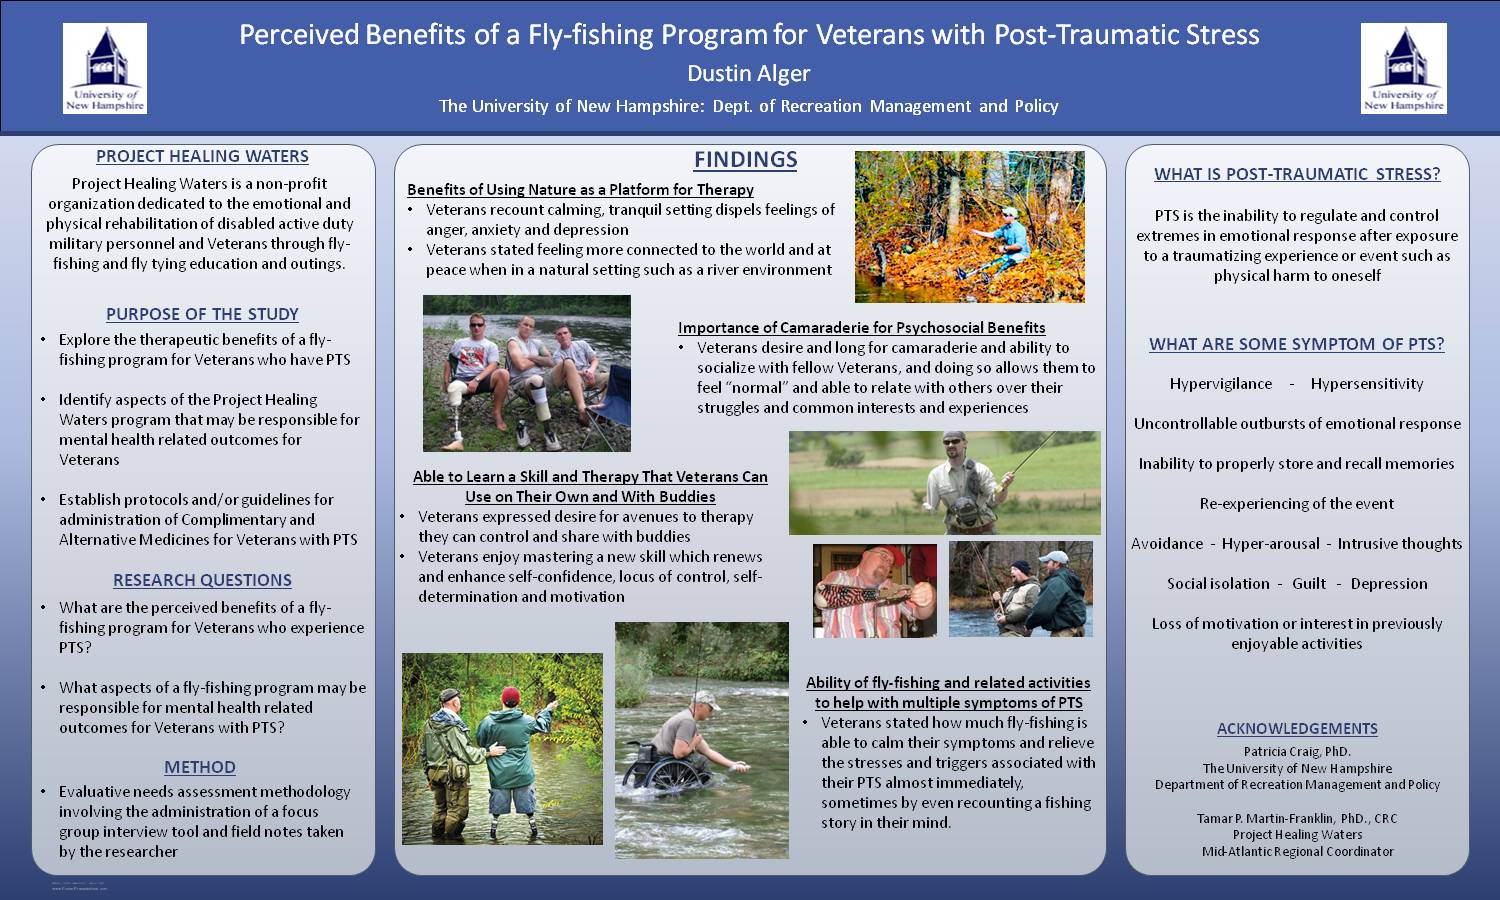 Perceived Benefits Of A Fly-Fishing Program For Veterans With Post-Traumatic Stress by dmo256